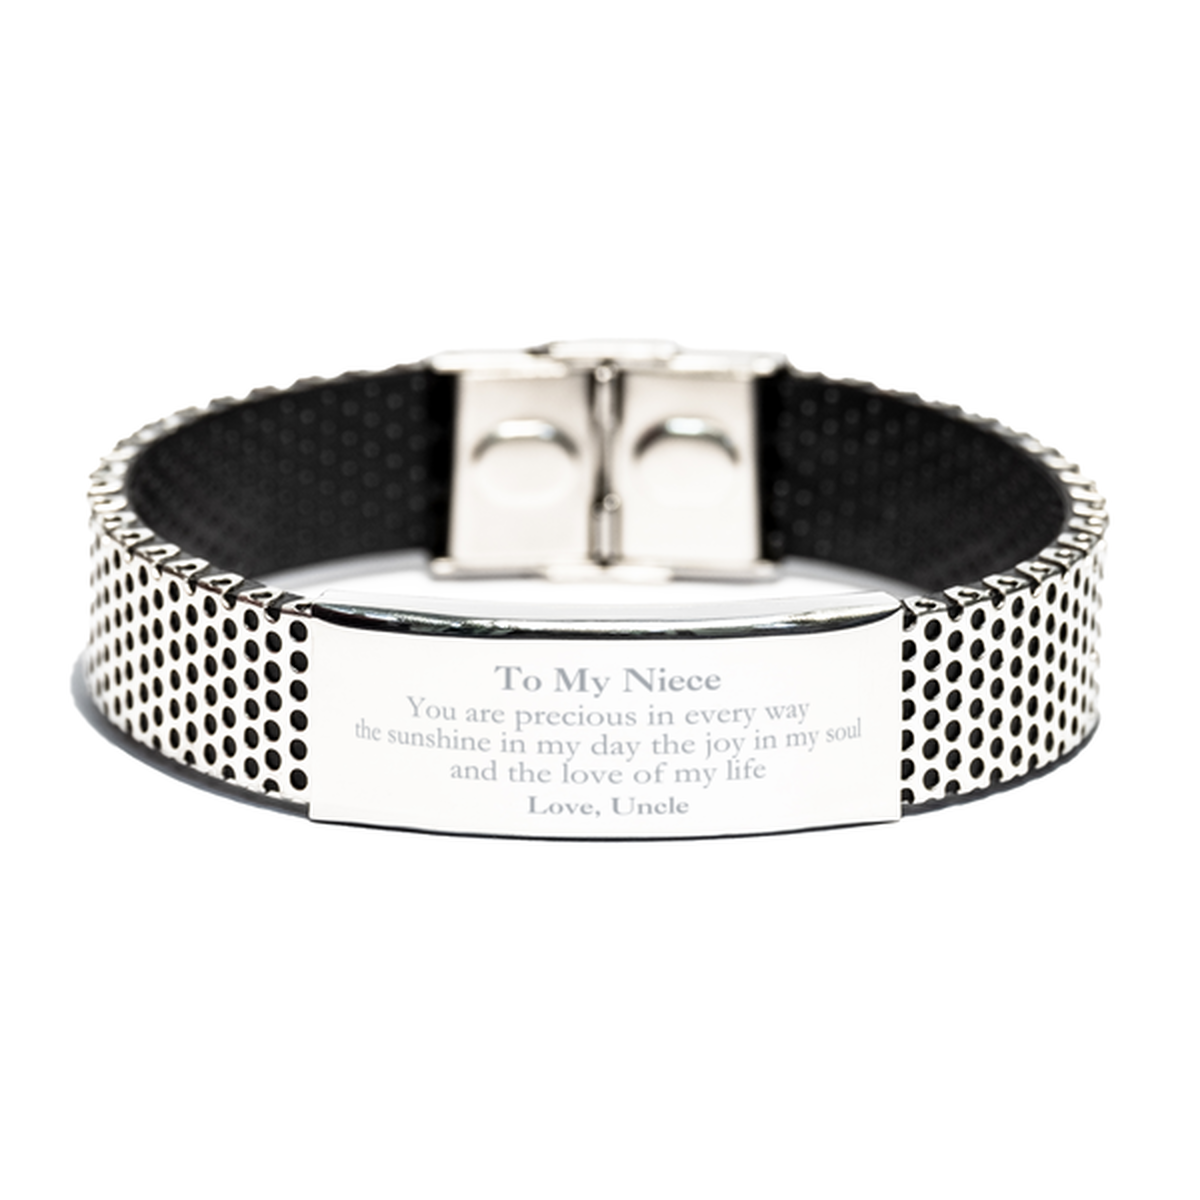 Graduation Gifts for Niece Stainless Steel Bracelet Present from Uncle, Christmas Niece Birthday Gifts Niece You are precious in every way the sunshine in my day. Love, Uncle